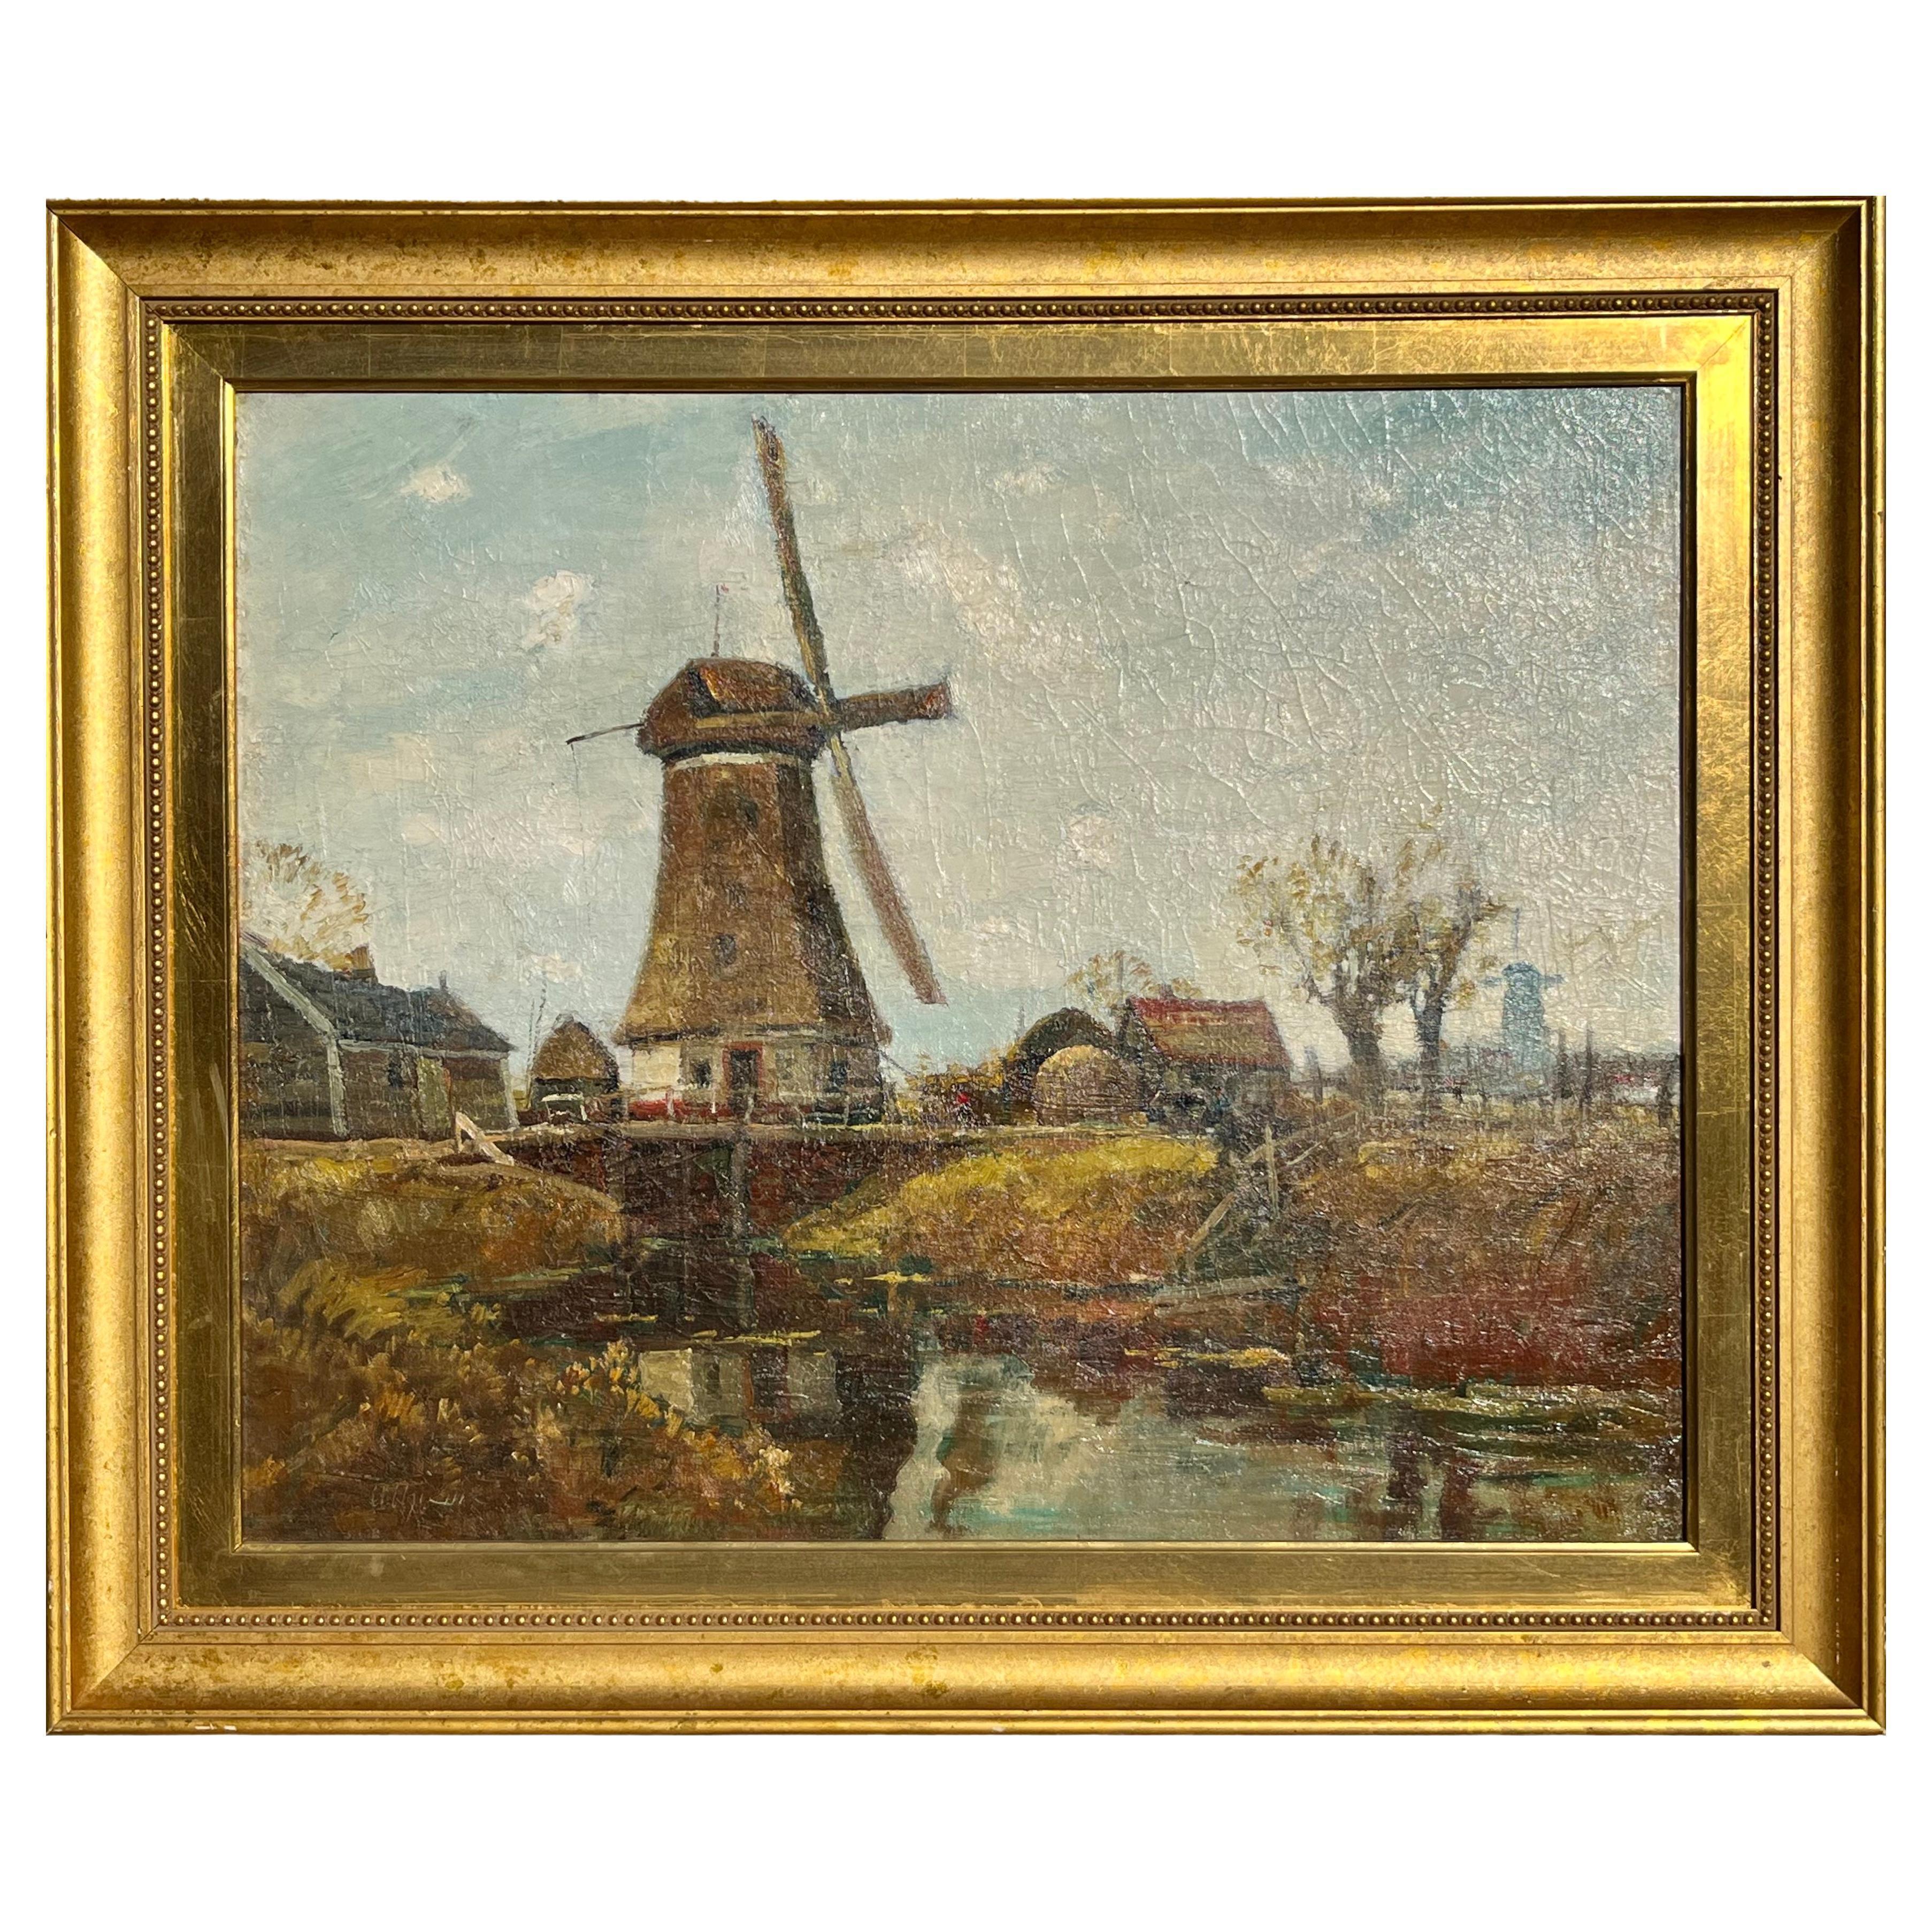 Anthony Thieme (Am. 1888–1954) Dutch landscape with Windmill.
Oil on canvas 
Signed (A. Thieme) L/L, 

A very large and formidable oils painting on canvas by Anthony Thieme. The landscape depicting the Netherlands hills covered in Windmills and farm